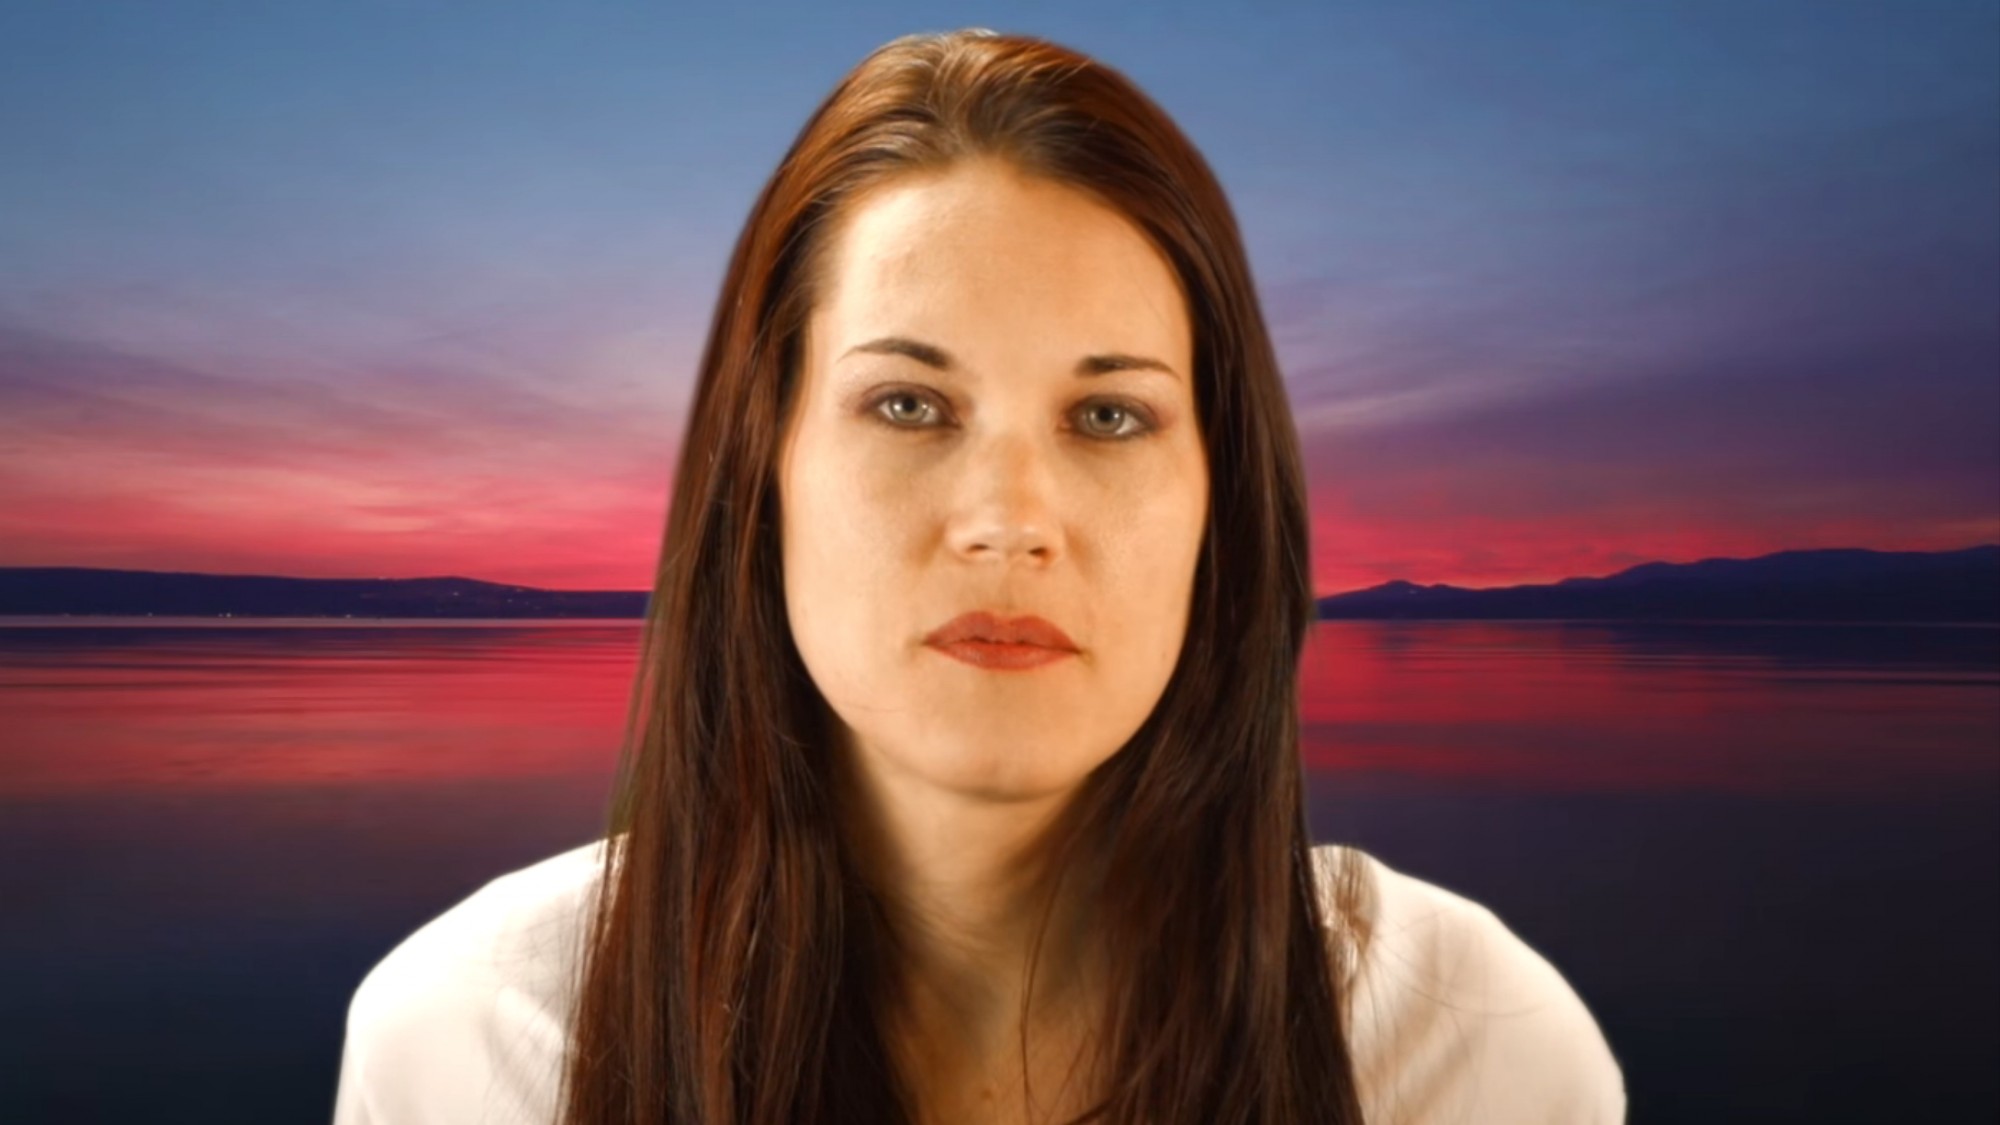 Yes, There Are Women-Led Cults Meet Teal Swan, a YouTuber who proves sellin...